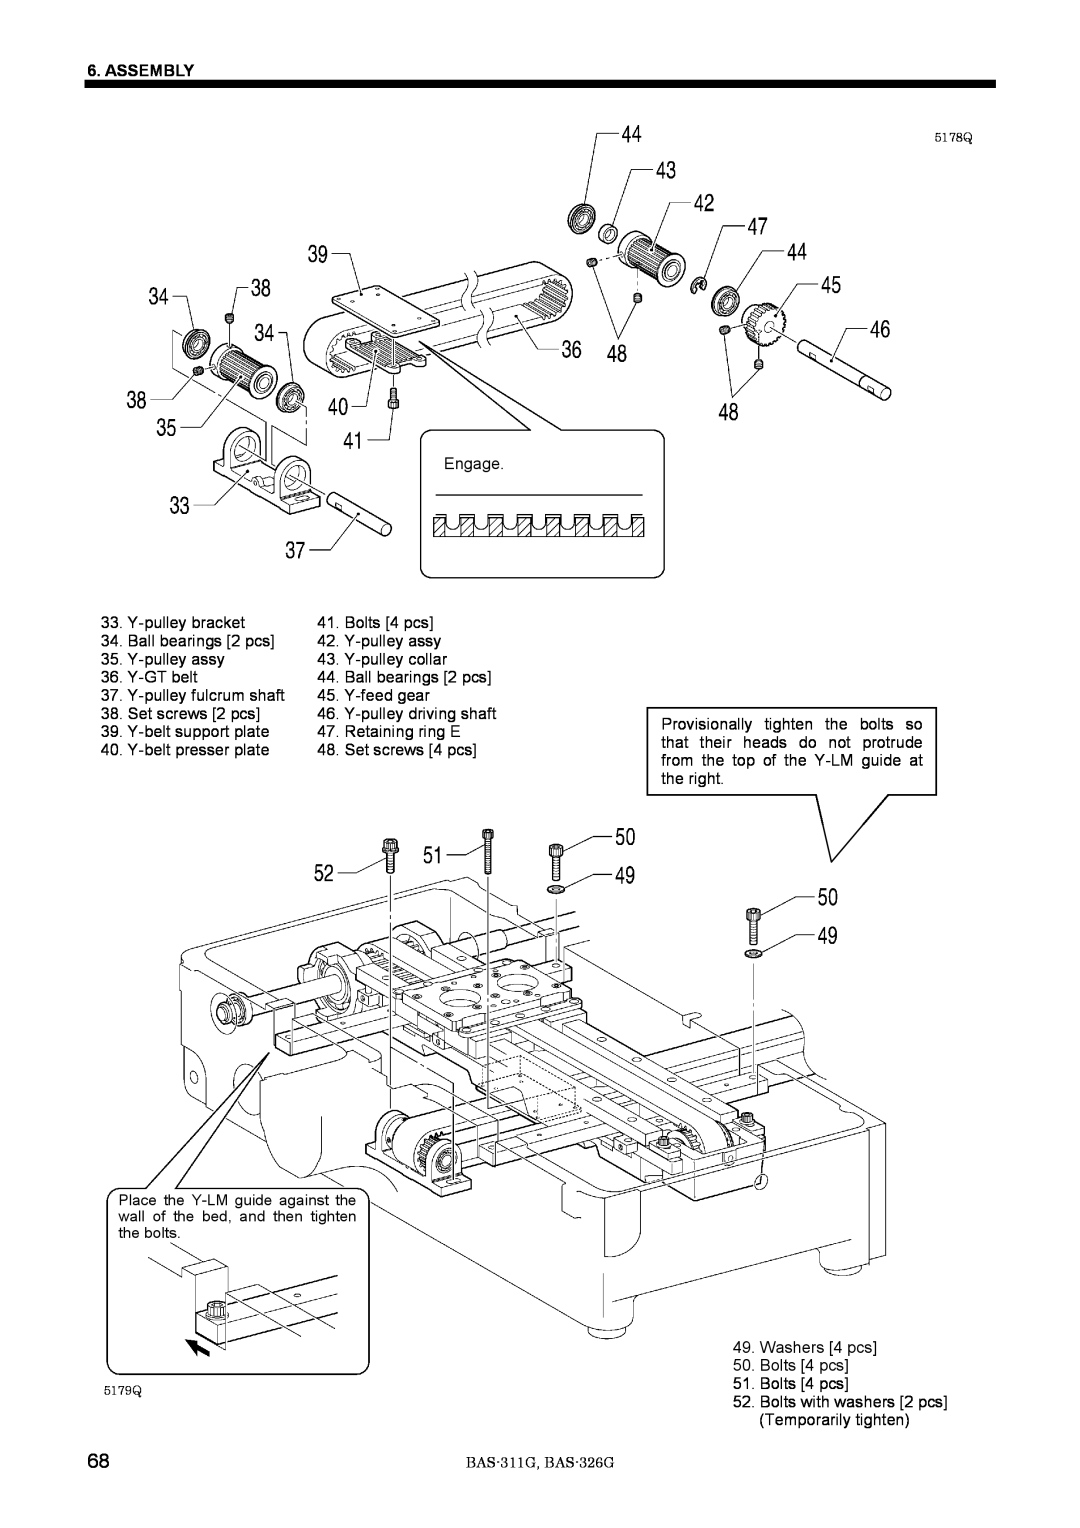 Brother BAS-311G service manual Assembly, 5178Q, 5179Q 